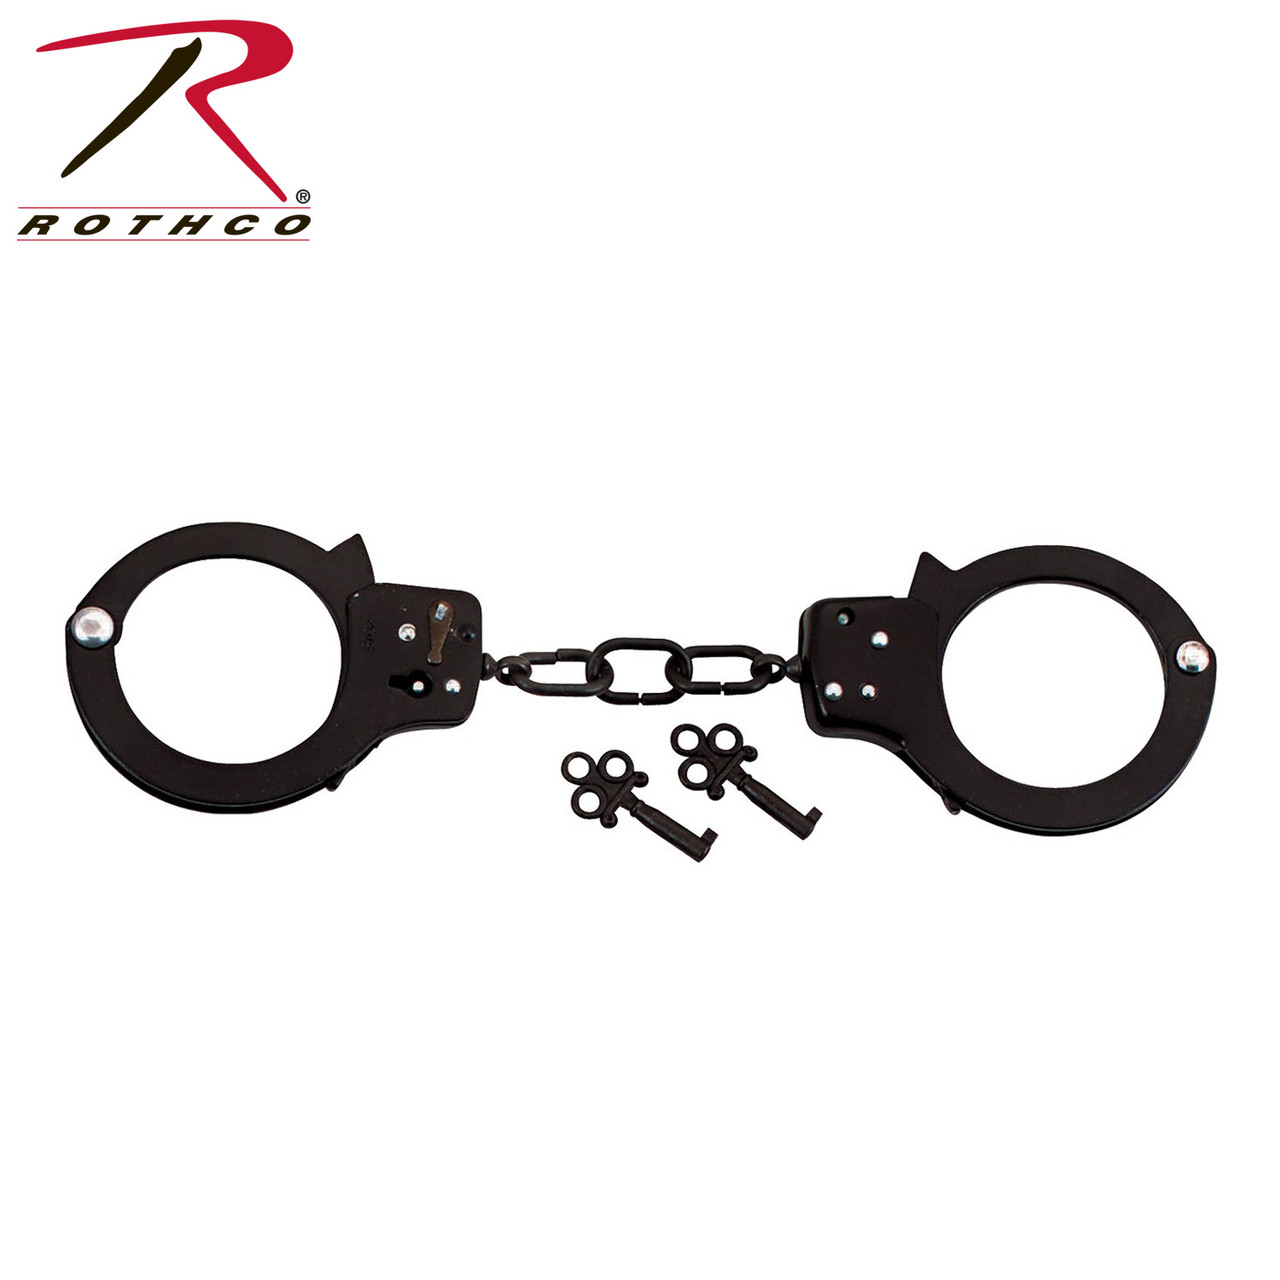 Rothco 20083-937 Double Lock Steel Handcuffs - 20083-937